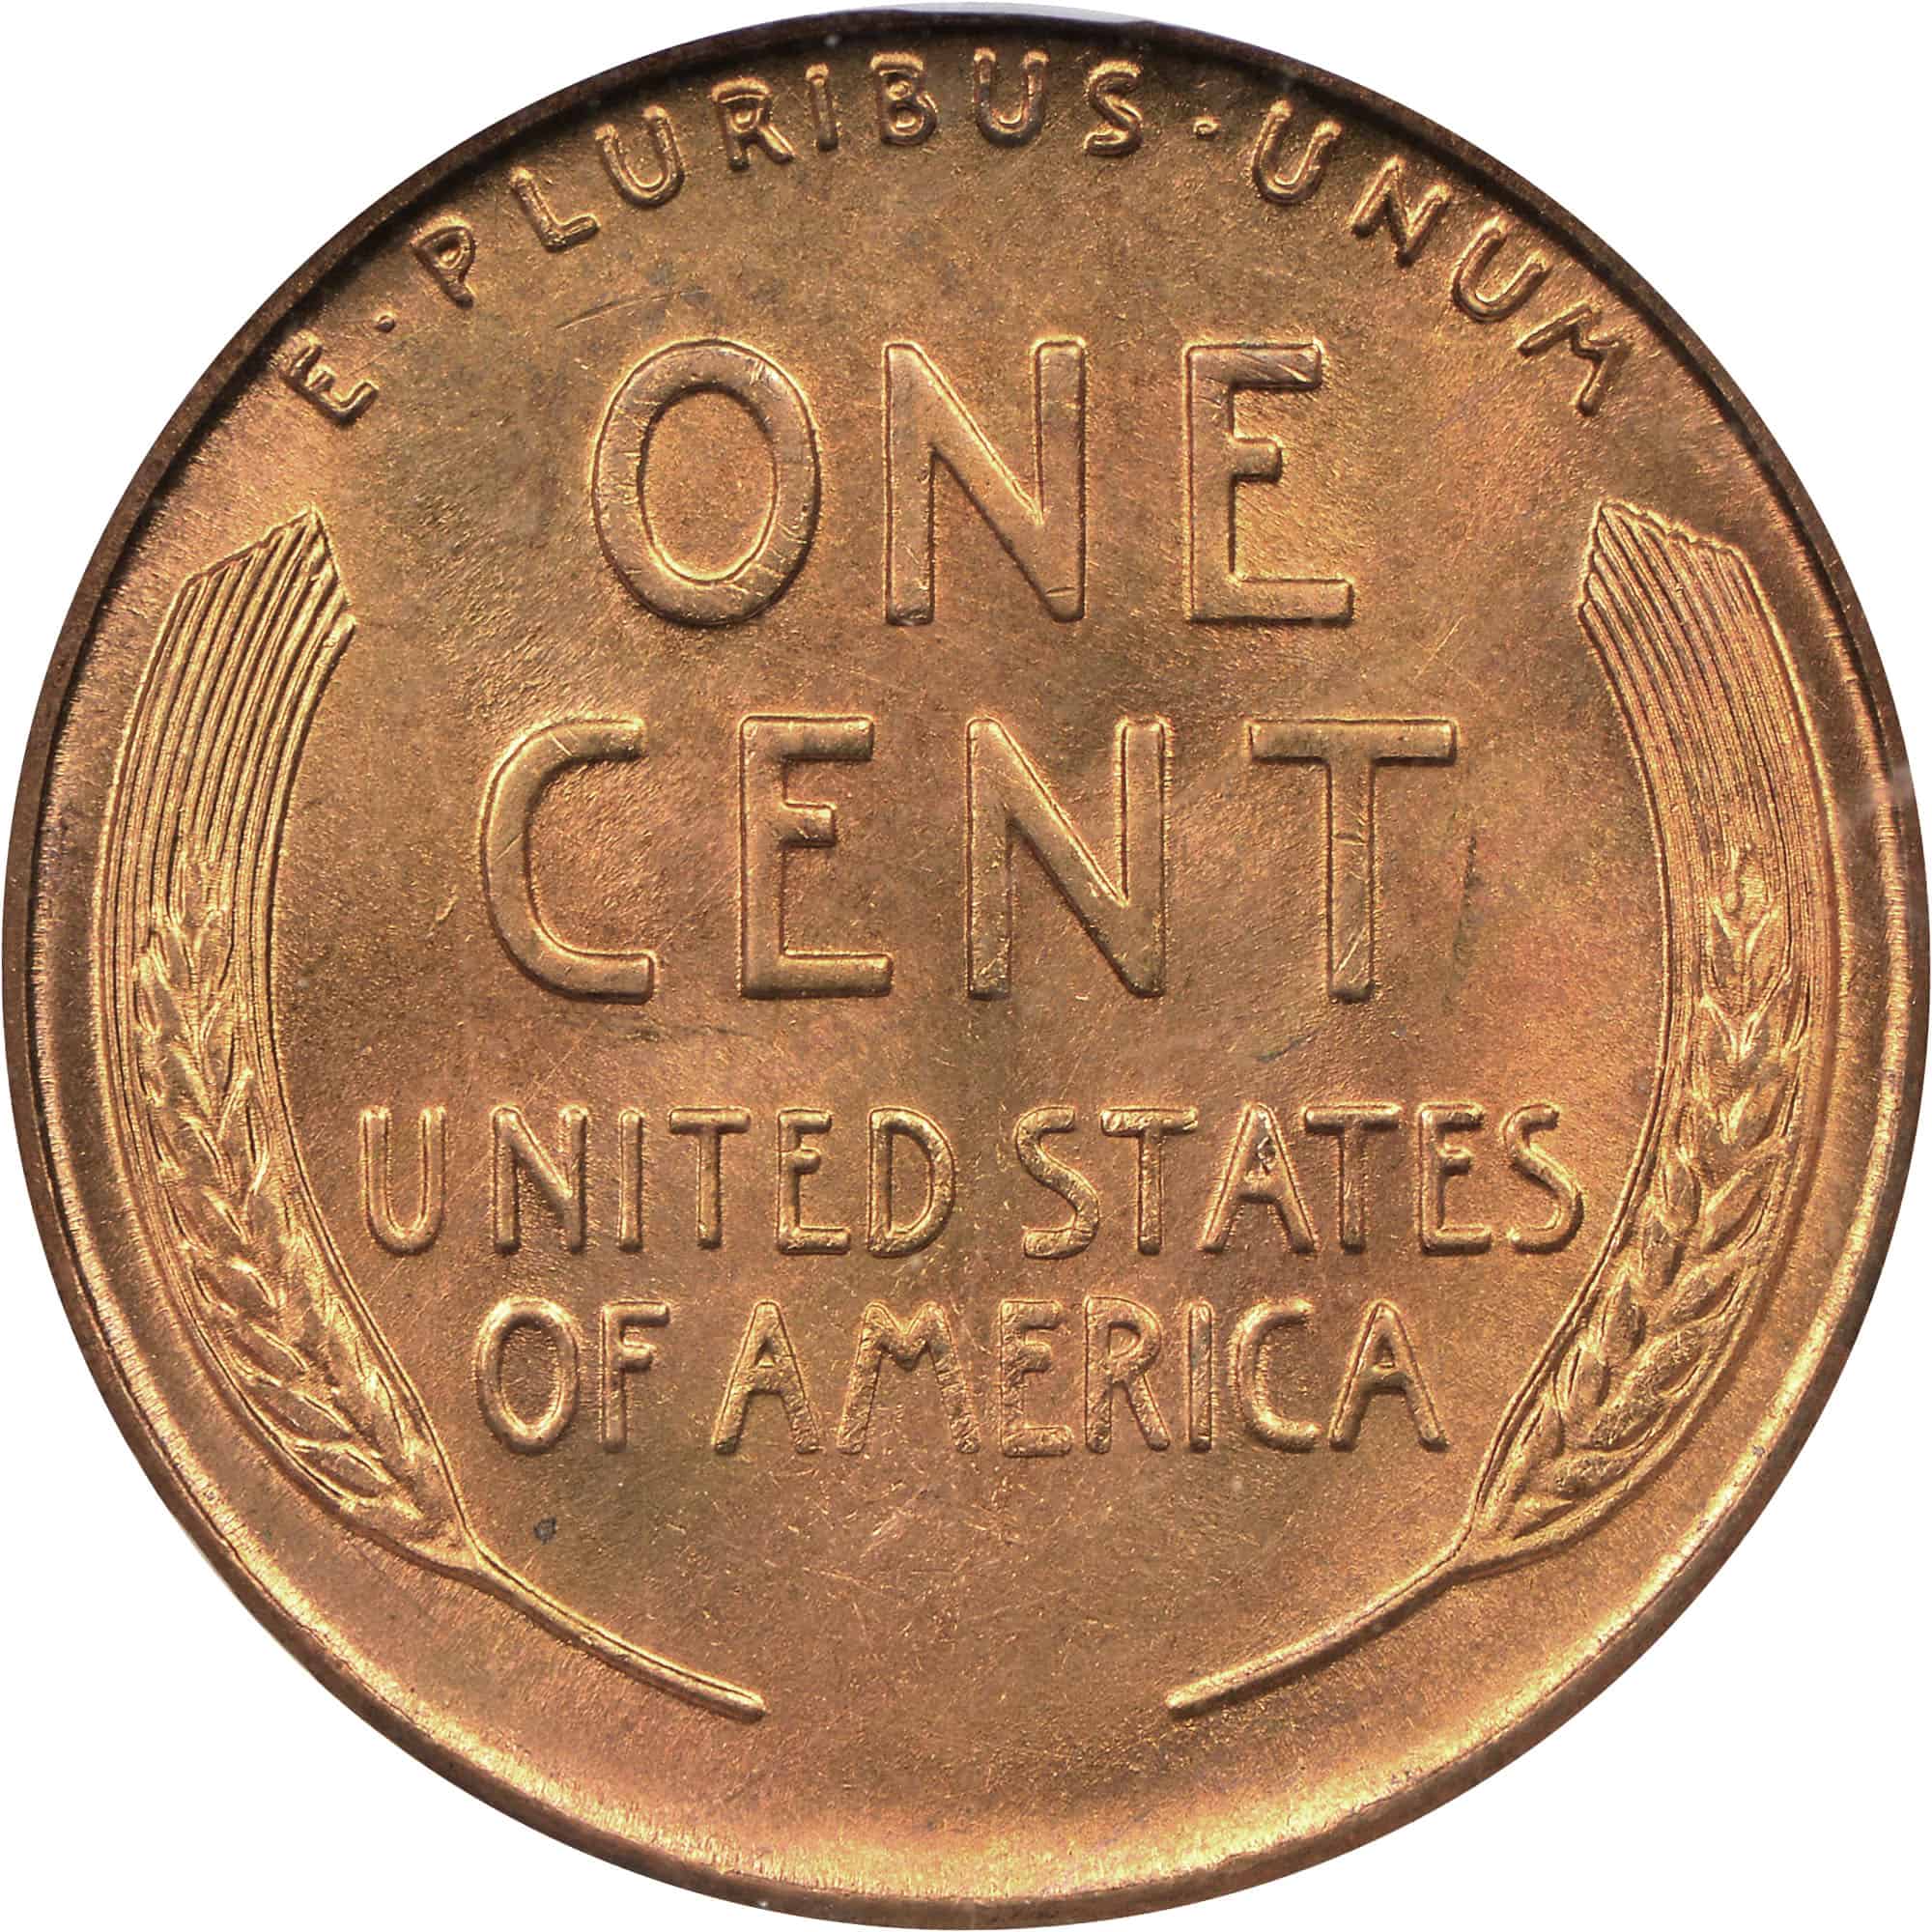 The Reverse of the 1946 Wheat Penny